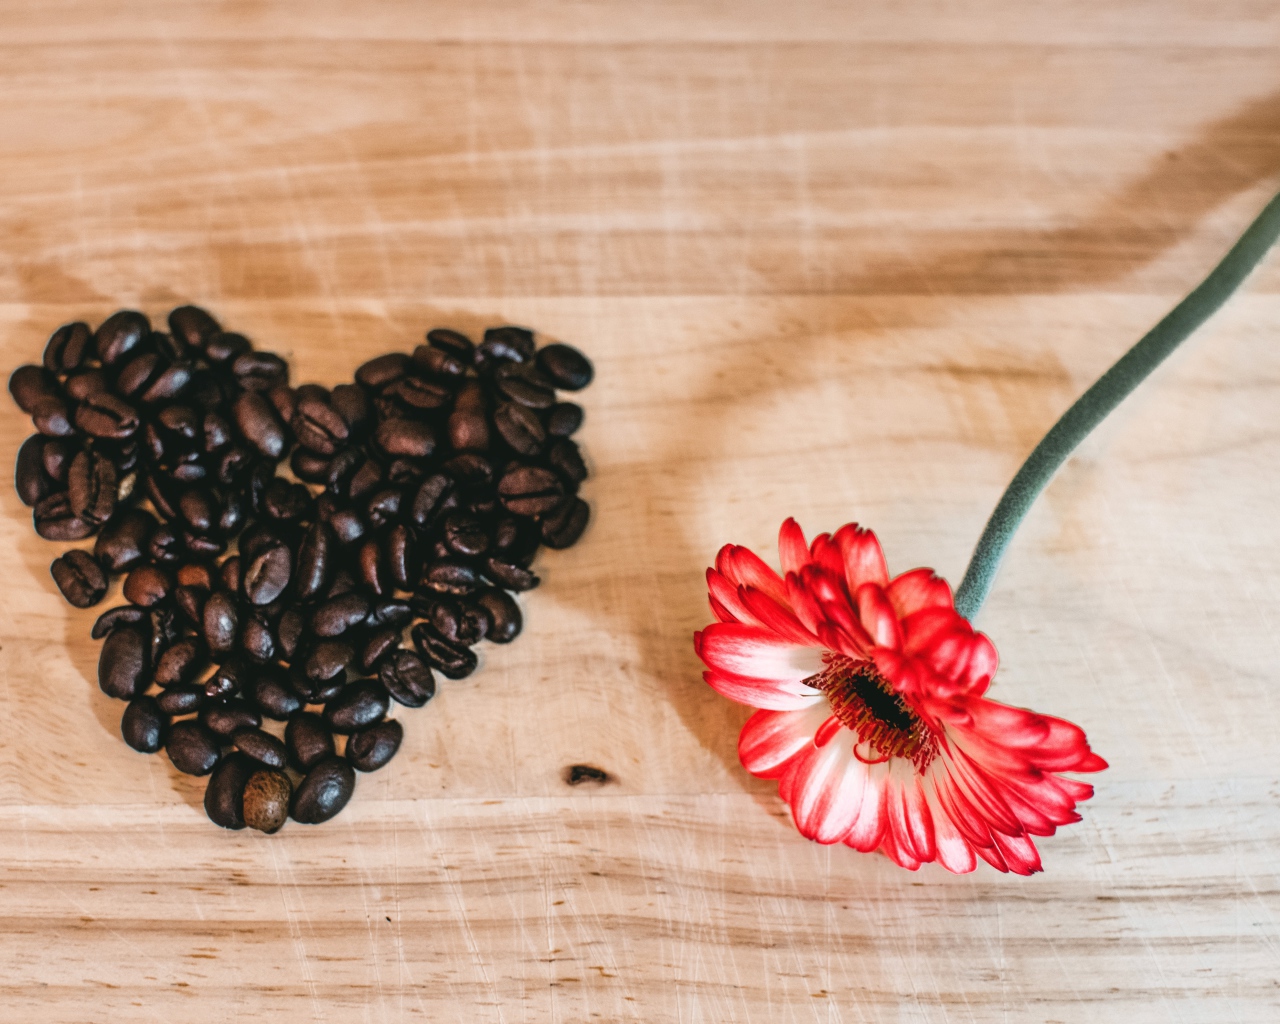 Red gerbera and heart made from coffee beans on the table